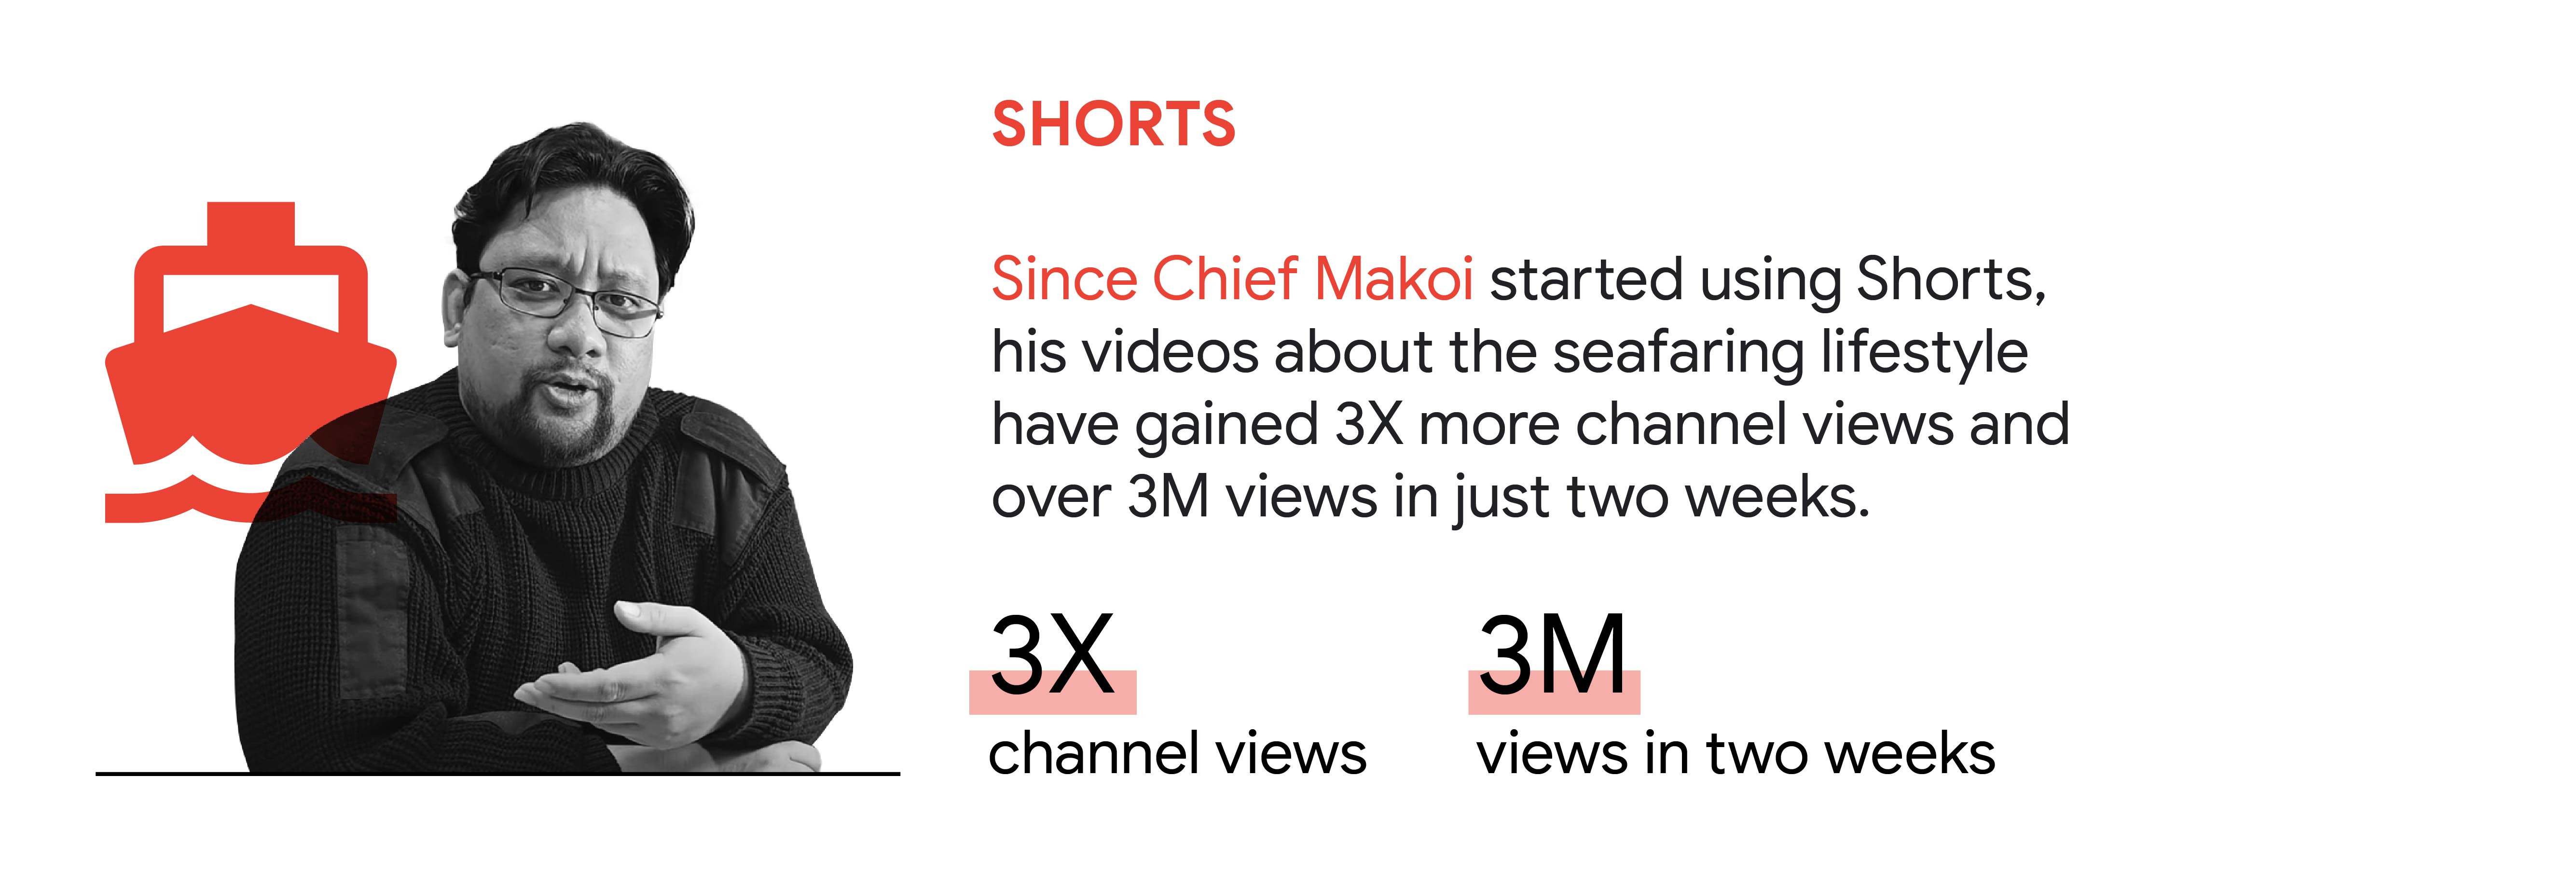 YouTube trend 5: Shorts. In the Philippines, since Chief Makoi started using Shorts, his videos about the seafaring lifestyle have gained 3X more channel views and over 3M views in just two weeks.